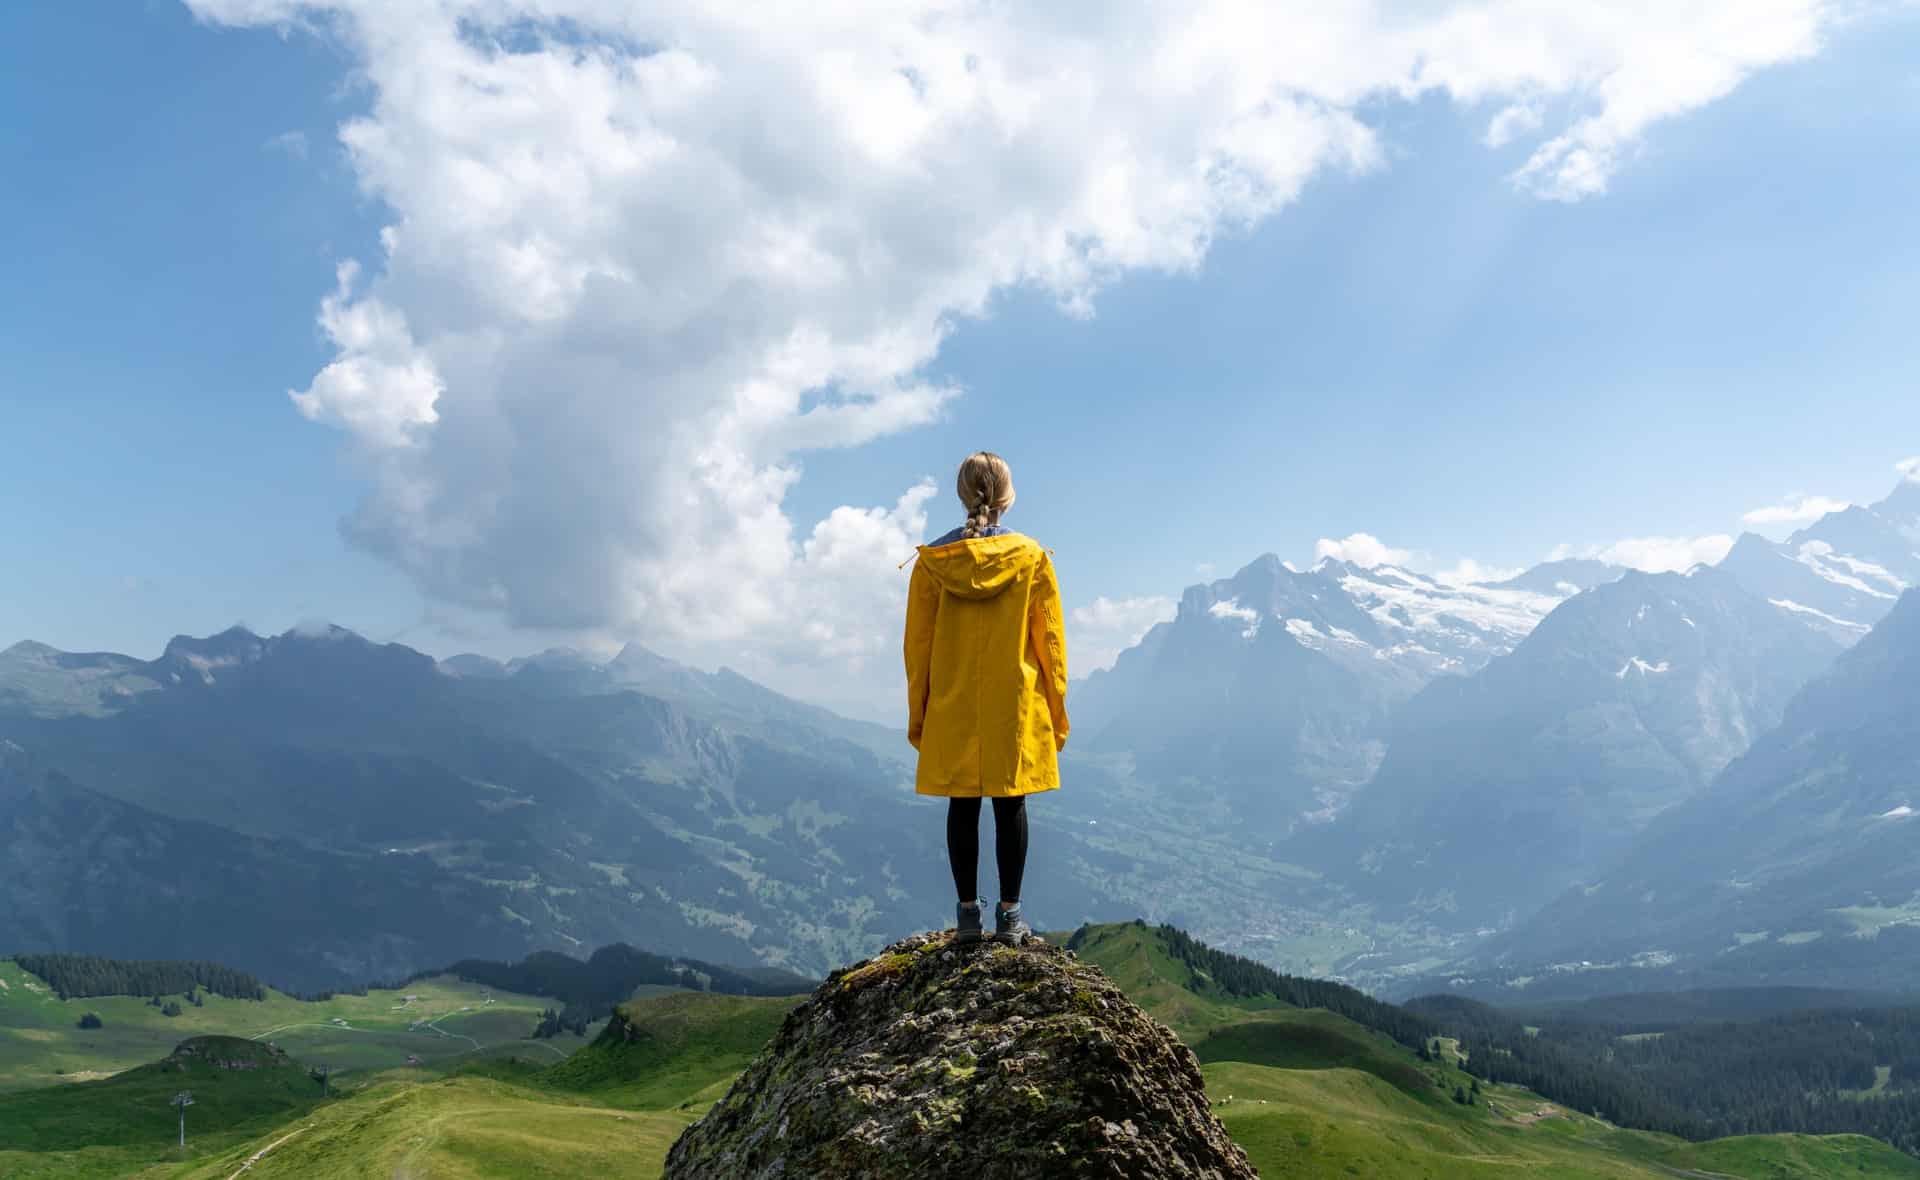 <p>Welcome to Reasons to Love Traveling! </p><p>What does traveling mean to you? Here are 10 of the many reasons I love traveling! In today's fast-paced, tech-obsessed world, social media may well be the perfect platform to showcase the world's beauty through the lens of travelers across the globe. </p><p>But travel is so much more than just getting that perfect Instagram shot for the ‘fans'. Travel should be meaningful to us all. </p><p>It should be exciting and inspiring, rejuvenating and grounding, educational and challenging, and most of all, it should be humbling.</p><p>You can read the entire article or jump to any section. </p>              Sharks, lions, tigers, as well as all about cats & dogs!           <a href='https://www.msn.com/en-us/channel/source/Animals%20Around%20The%20Globe%20US/sr-vid-ryujycftmyx7d7tmb5trkya28raxe6r56iuty5739ky2rf5d5wws?ocid=anaheim-ntp-following&cvid=1ff21e393be1475a8b3dd9a83a86b8df&ei=10'>           Click here to get to the Animals Around The Globe profile page</a><b> and hit "Follow" to never miss out.</b>